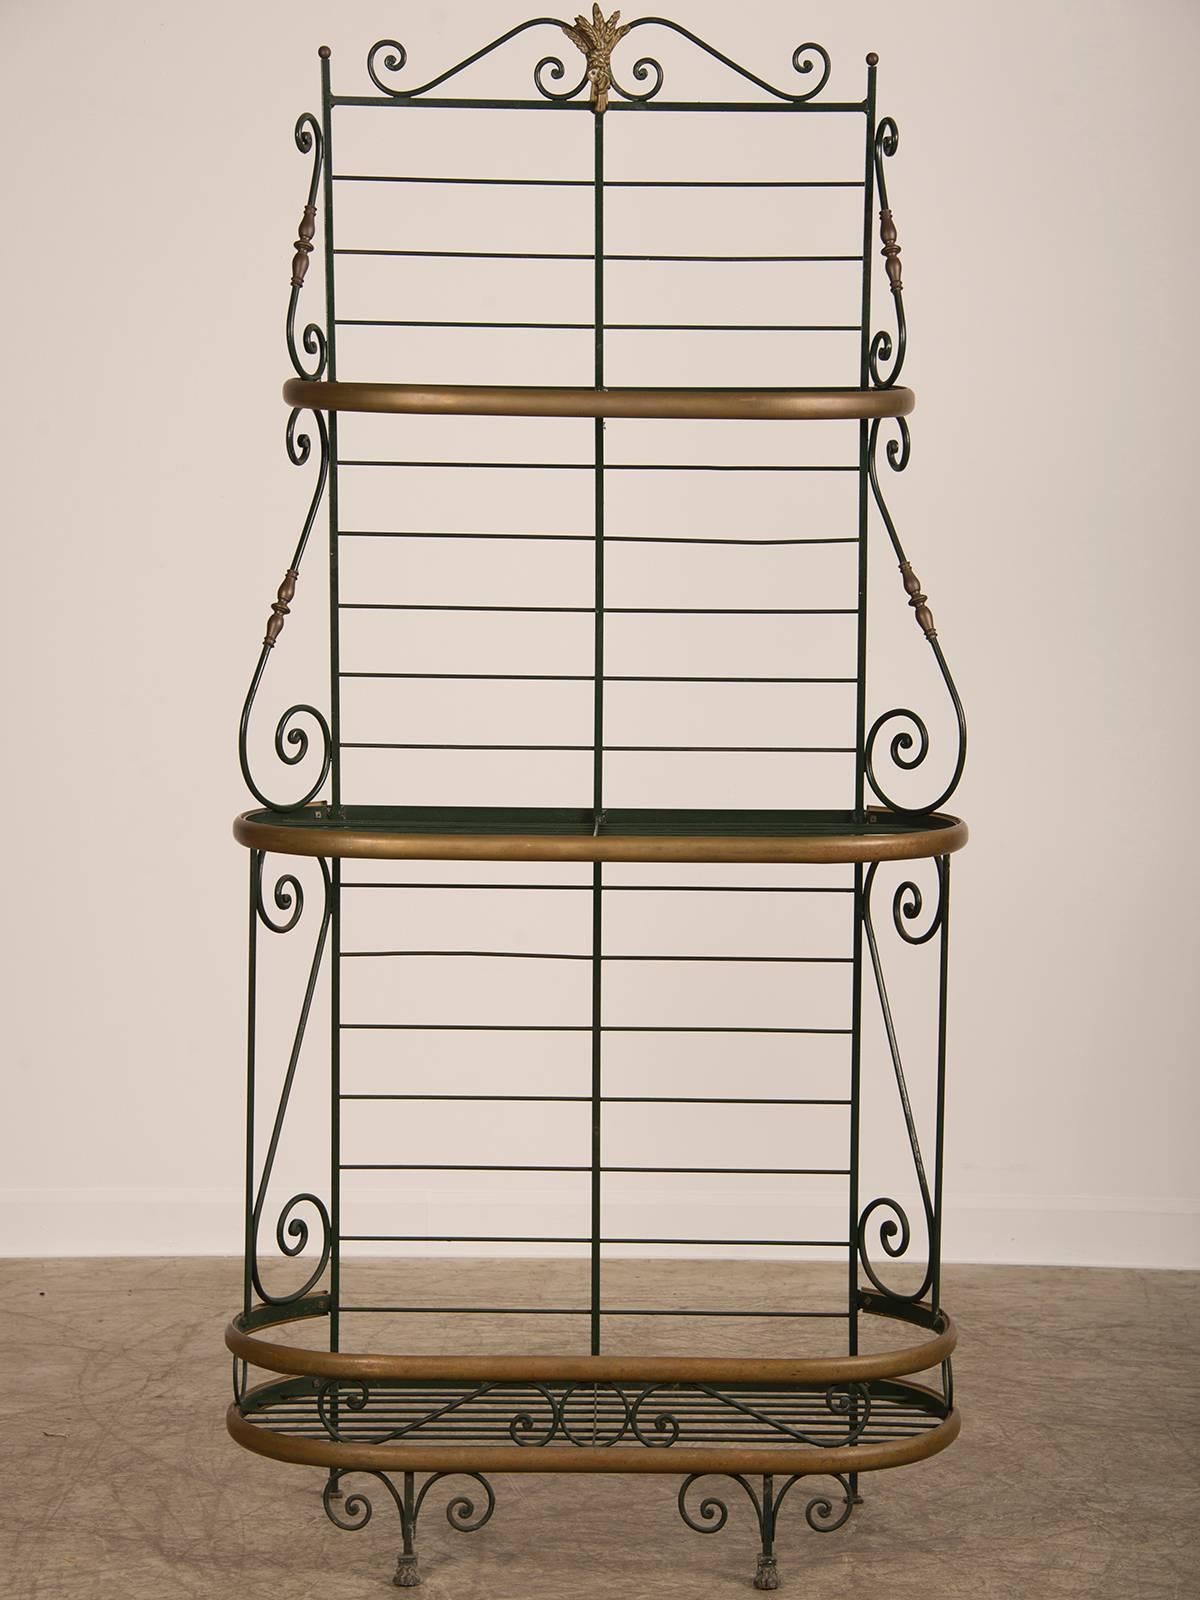 Receive our new selections direct from 1stdibs by email each week. Please click Follow Dealer below and see them first!

A vintage French iron and brass baker's rack circa 1920 standing on paw feet now with glass shelves on each level.